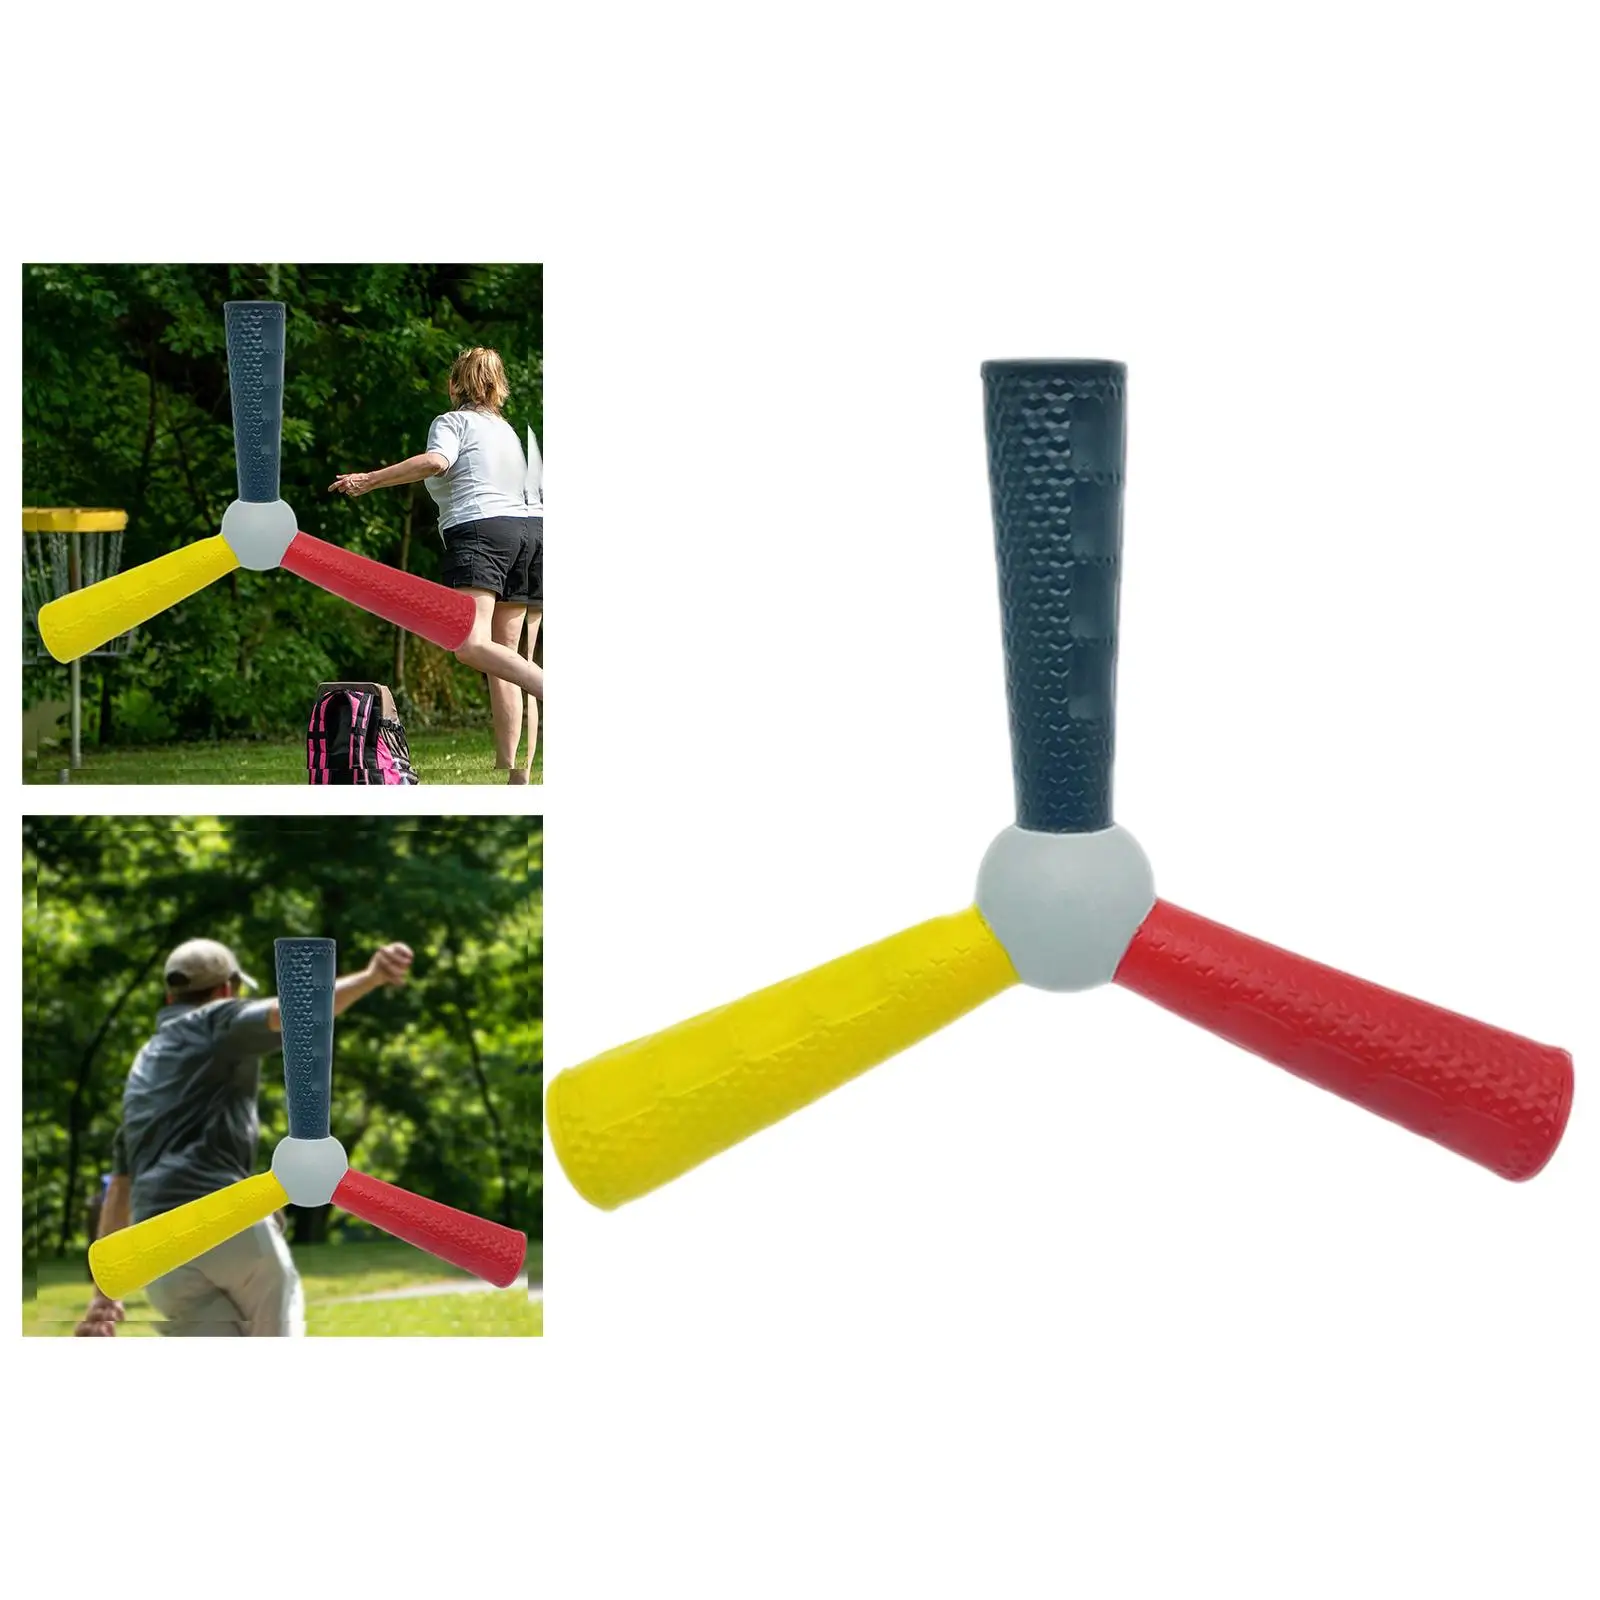 Mini Boomerang, Speed Training Tool Training Hand Eye Coordination Speed Agility Training for Garden Picnic Gifts for Adults